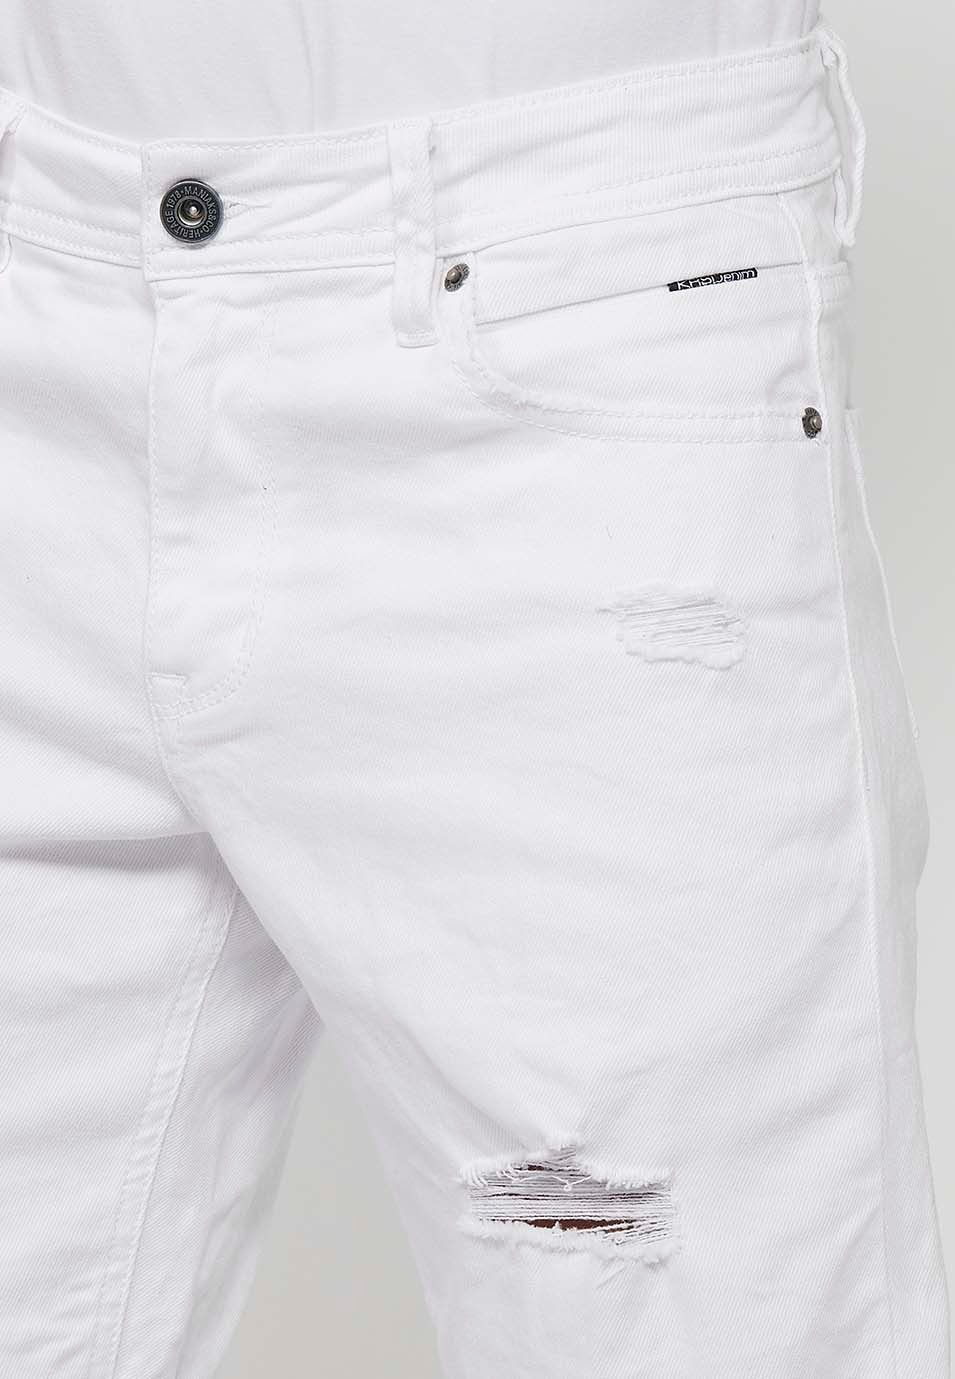 Denim Bermuda shorts with turn-up finish and front closure with zipper and button in White for Men 9